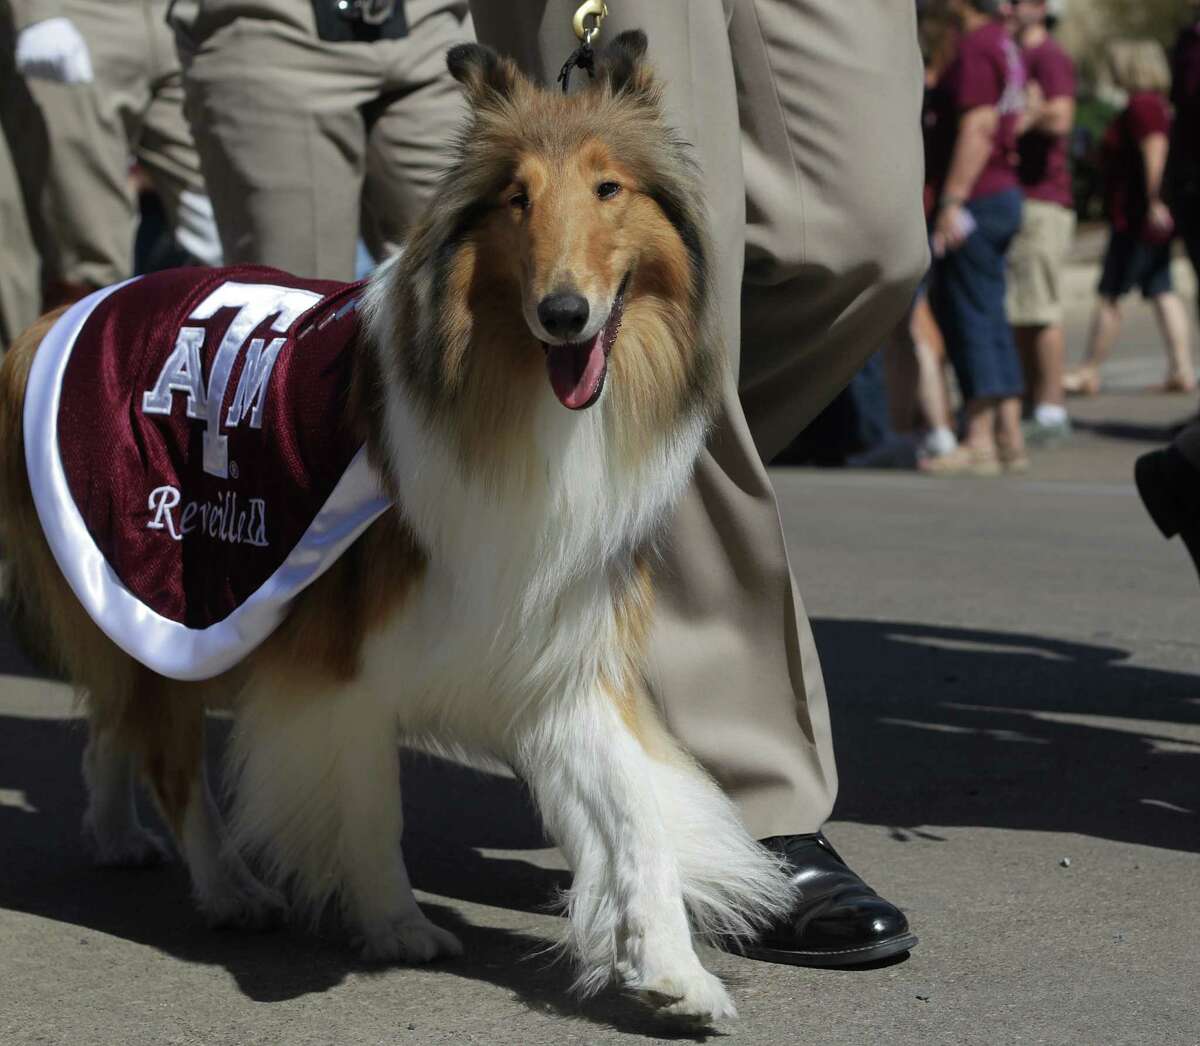 Reveille, the Texas A&M mascot, is escorted with members the ROTC before a football game. PETA filed a lawsuit this week claiming the university has violated the First Amendment.